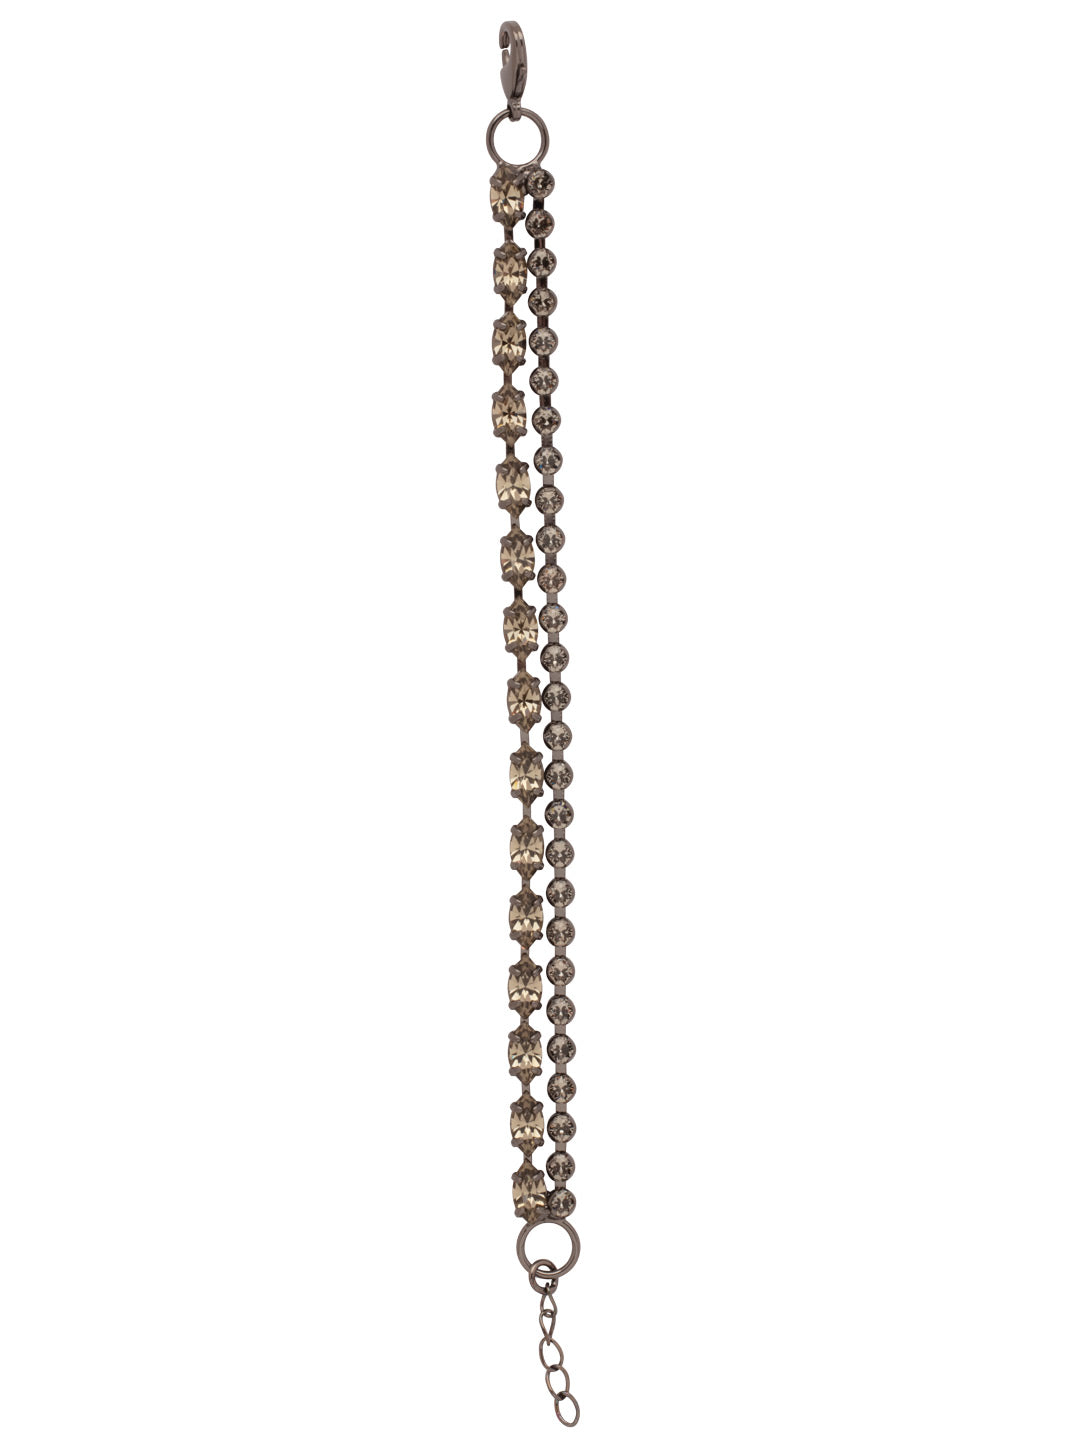 Clarissa Layered Tennis Bracelet - BFL6GMBD - <p>The Clarissa Layered Tennis Bracelet features a rhinestone chain and navette crystal chain layered on an adjustable chain, secured with a lobster claw clasp. From Sorrelli's Black Diamond collection in our Gun Metal finish.</p>